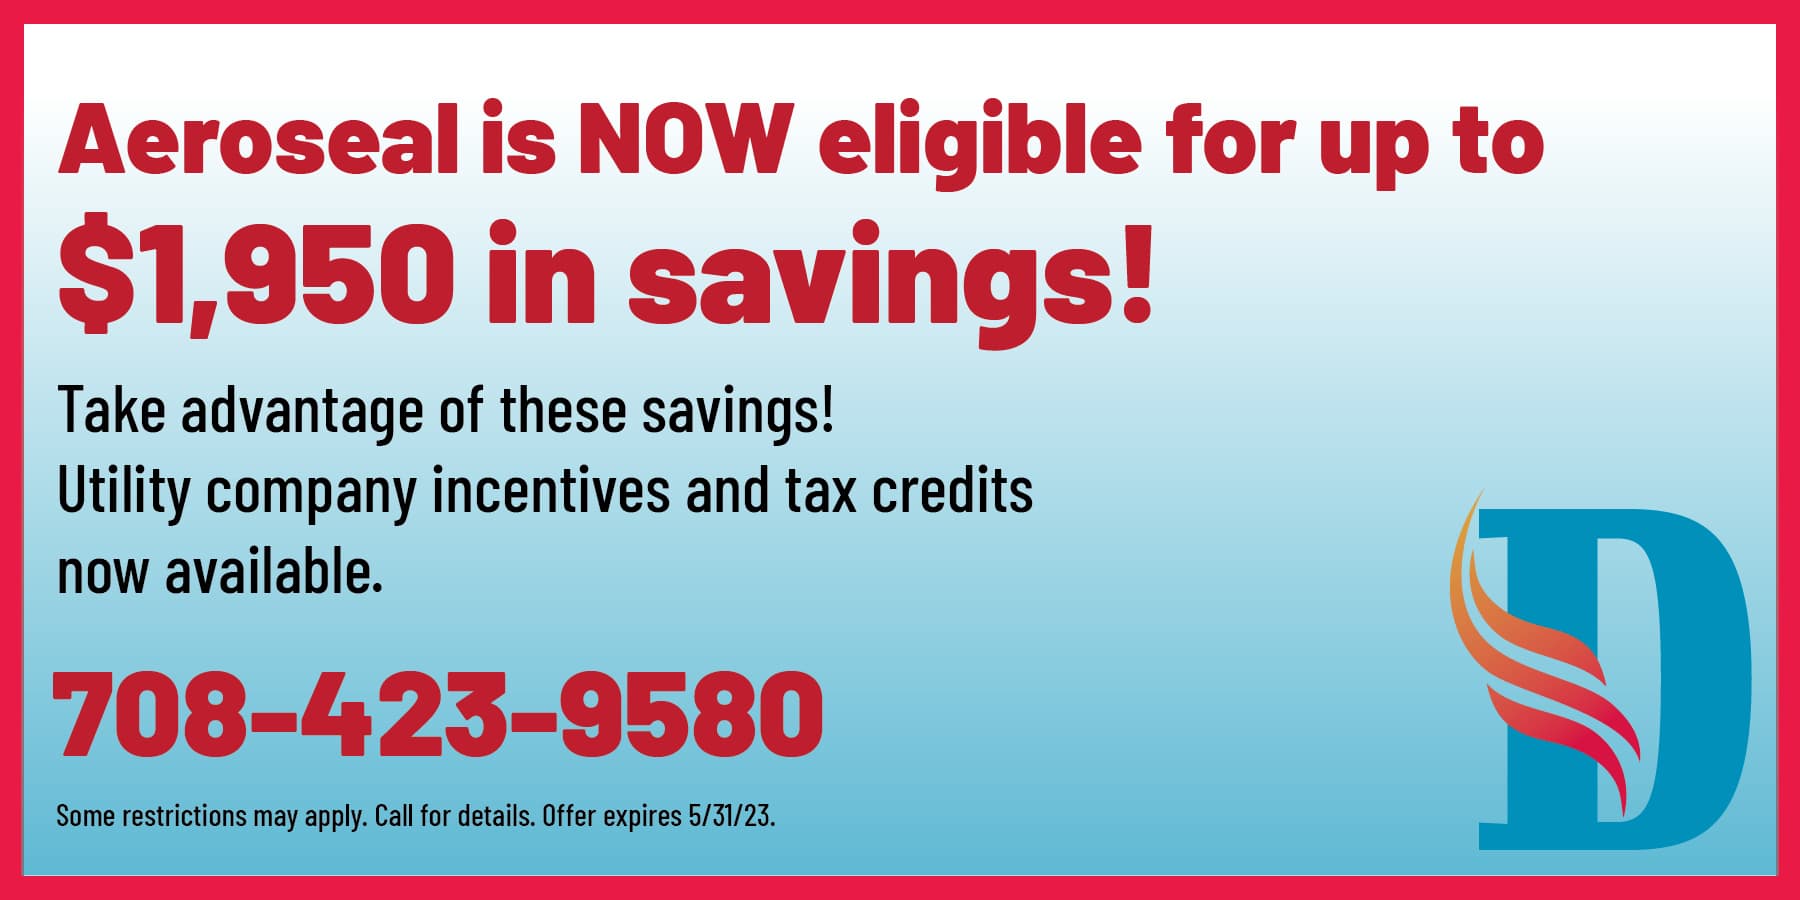 Aeroseal is NOW eligible for up to 50 in savings! Take advantage of these savings! Utility company and tax credits now available.